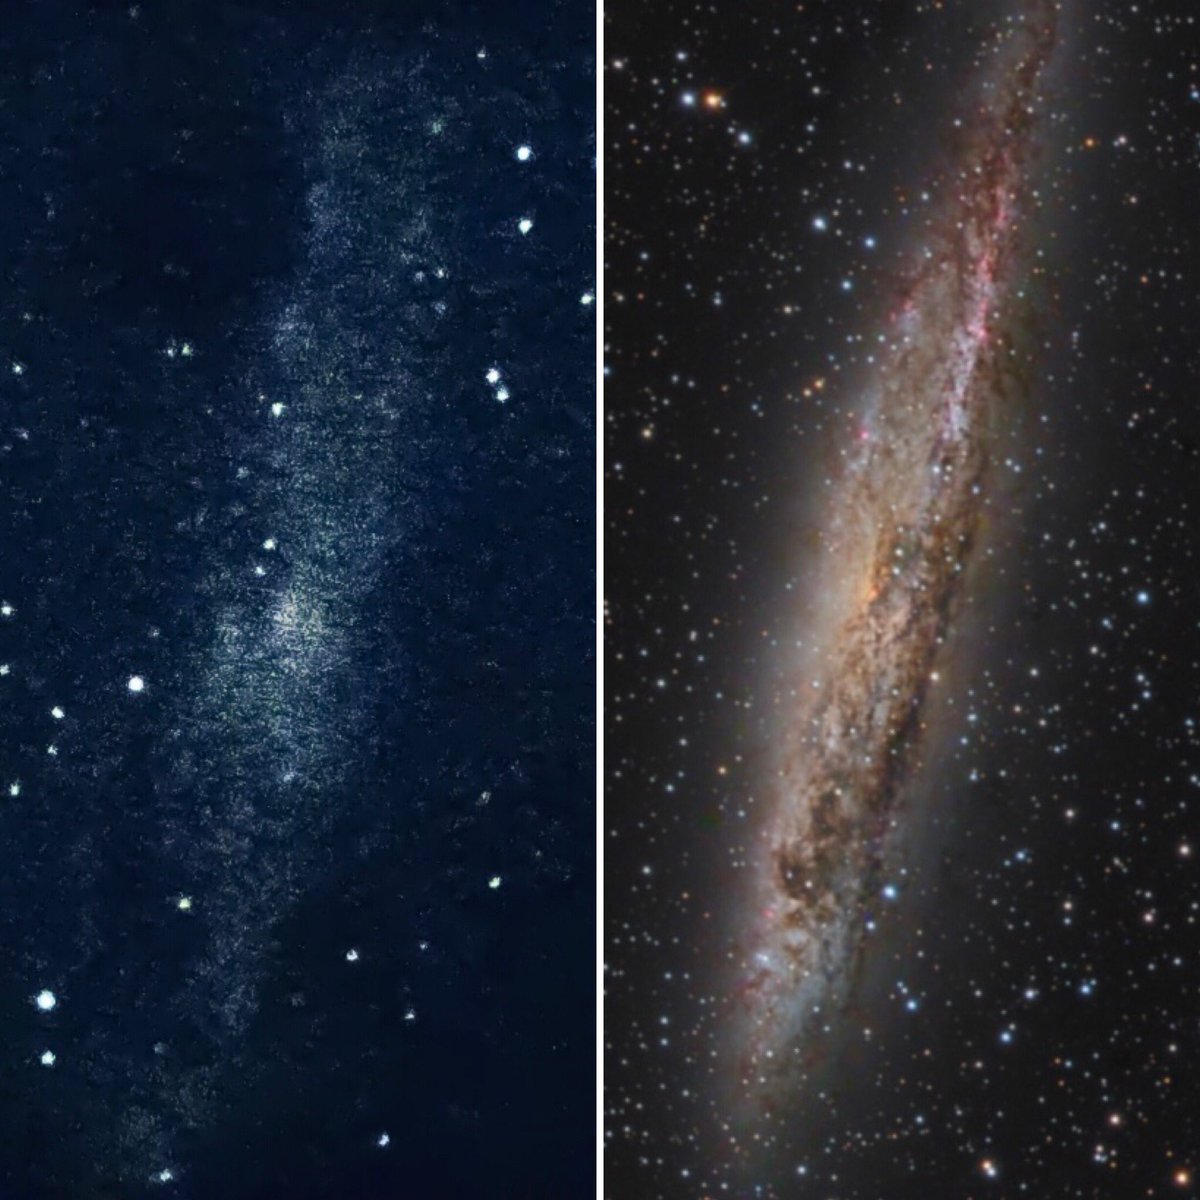 Here's my (dodgy) image next to the excellent APOD captured by Martin PughCaldwell 83 is about the size of the Milky Way, and located 13 million light years away in the Centaurus constellation. It's a large spiral galaxy (another first for me!) being seen almost edge on.3/8